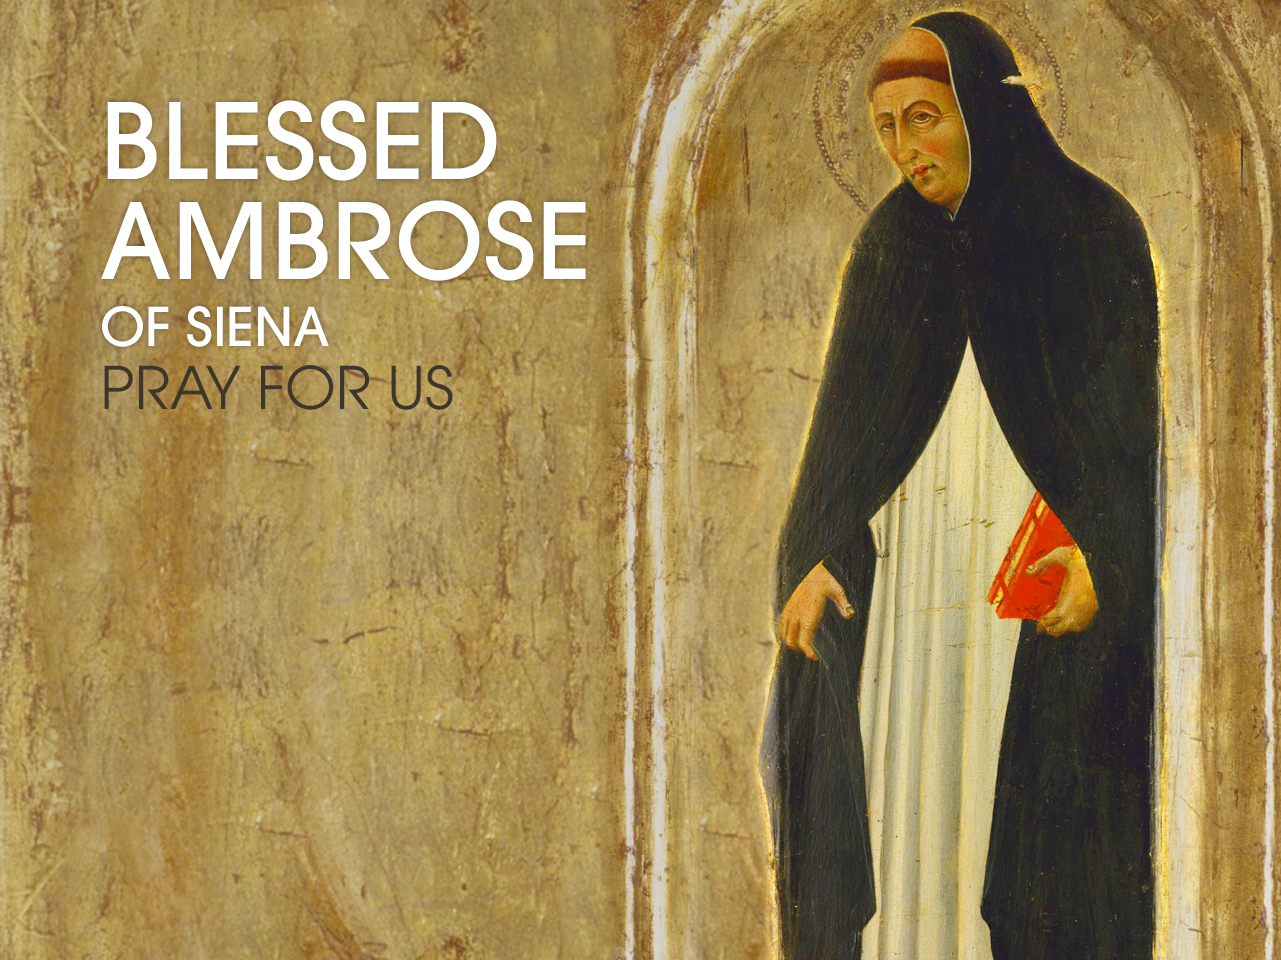 Blessed Ambrose of Siena